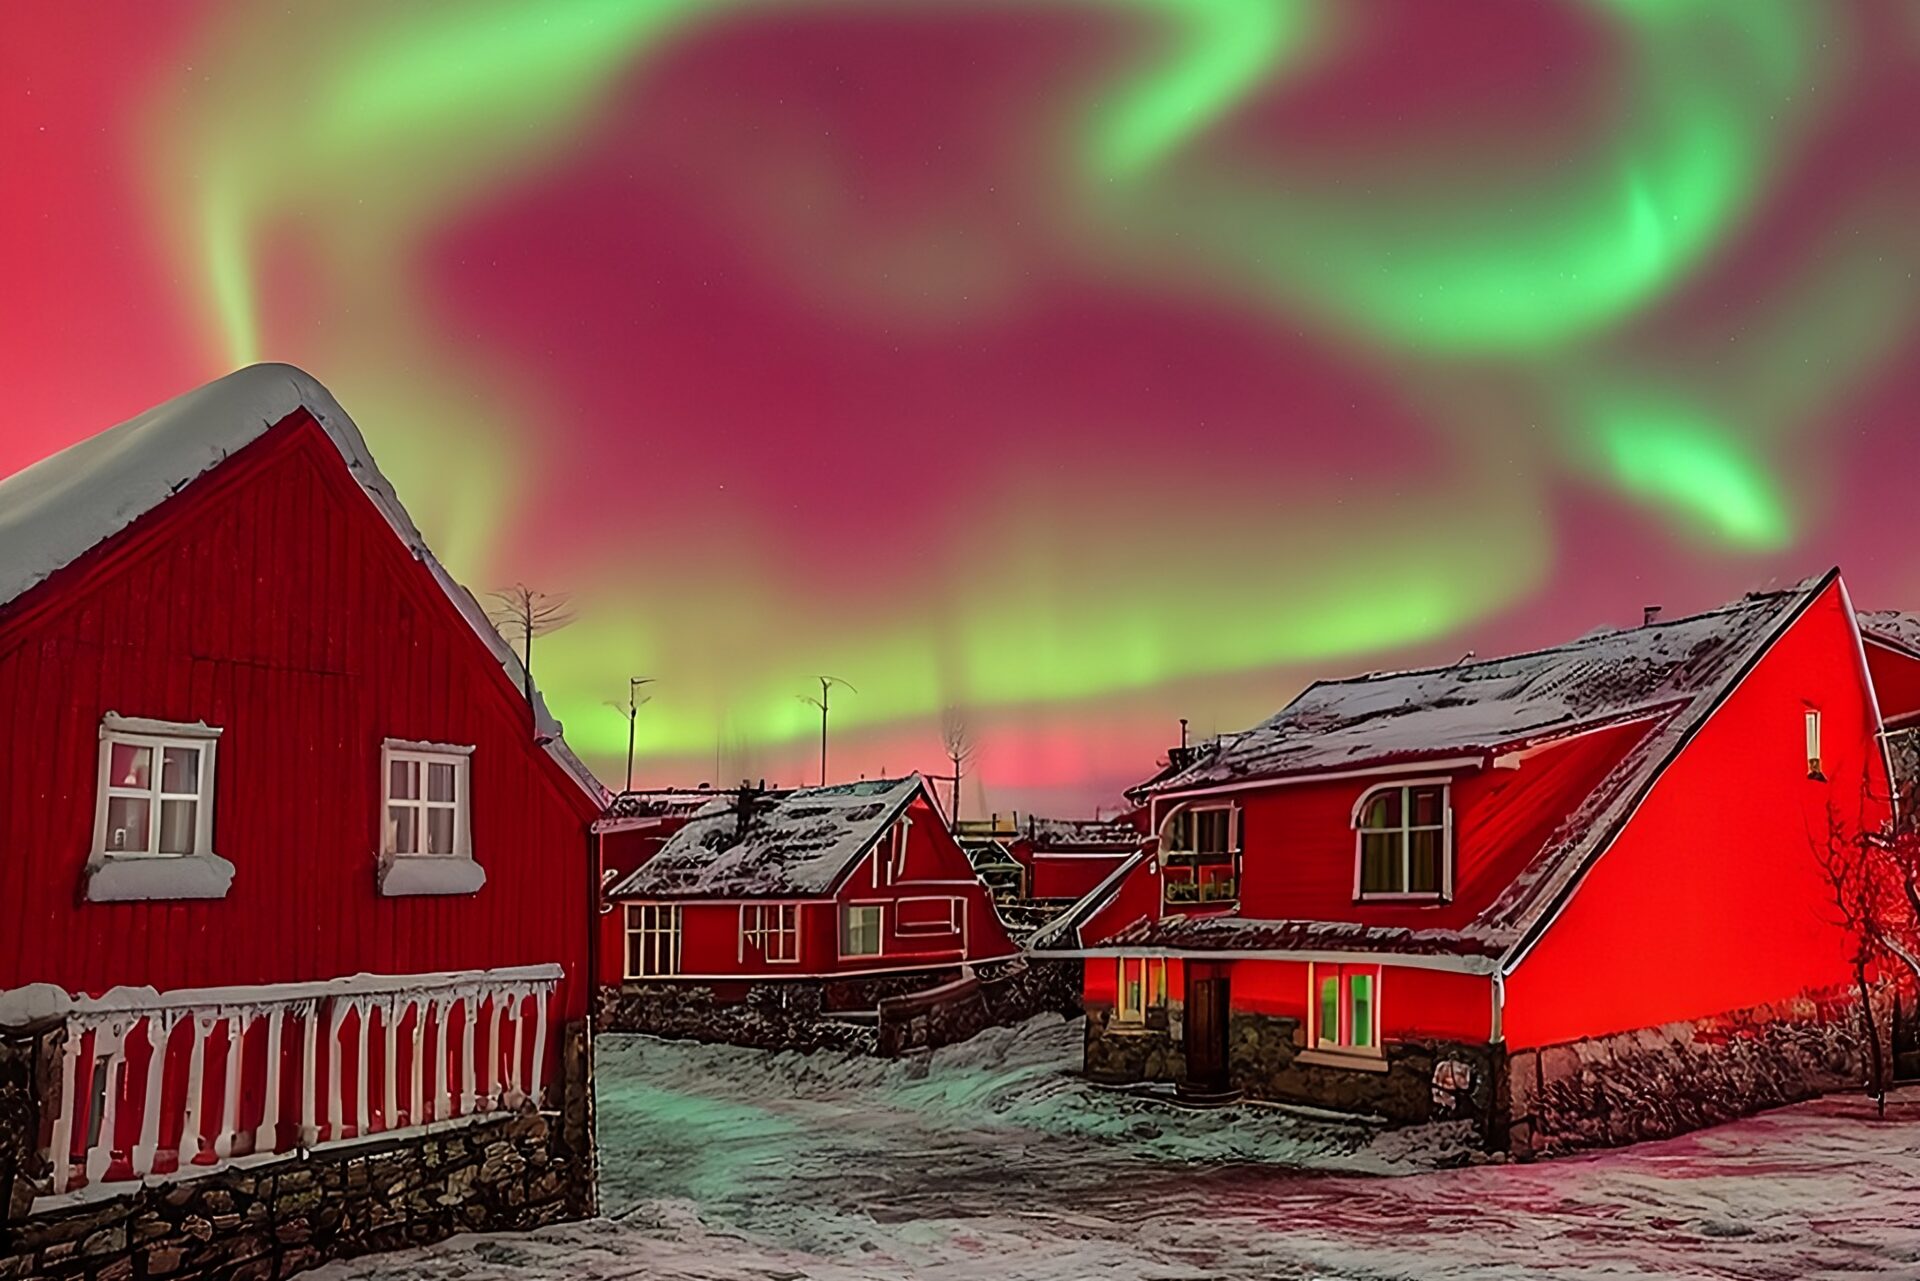 Sky filled with amazing colors over fisher village in Iceland